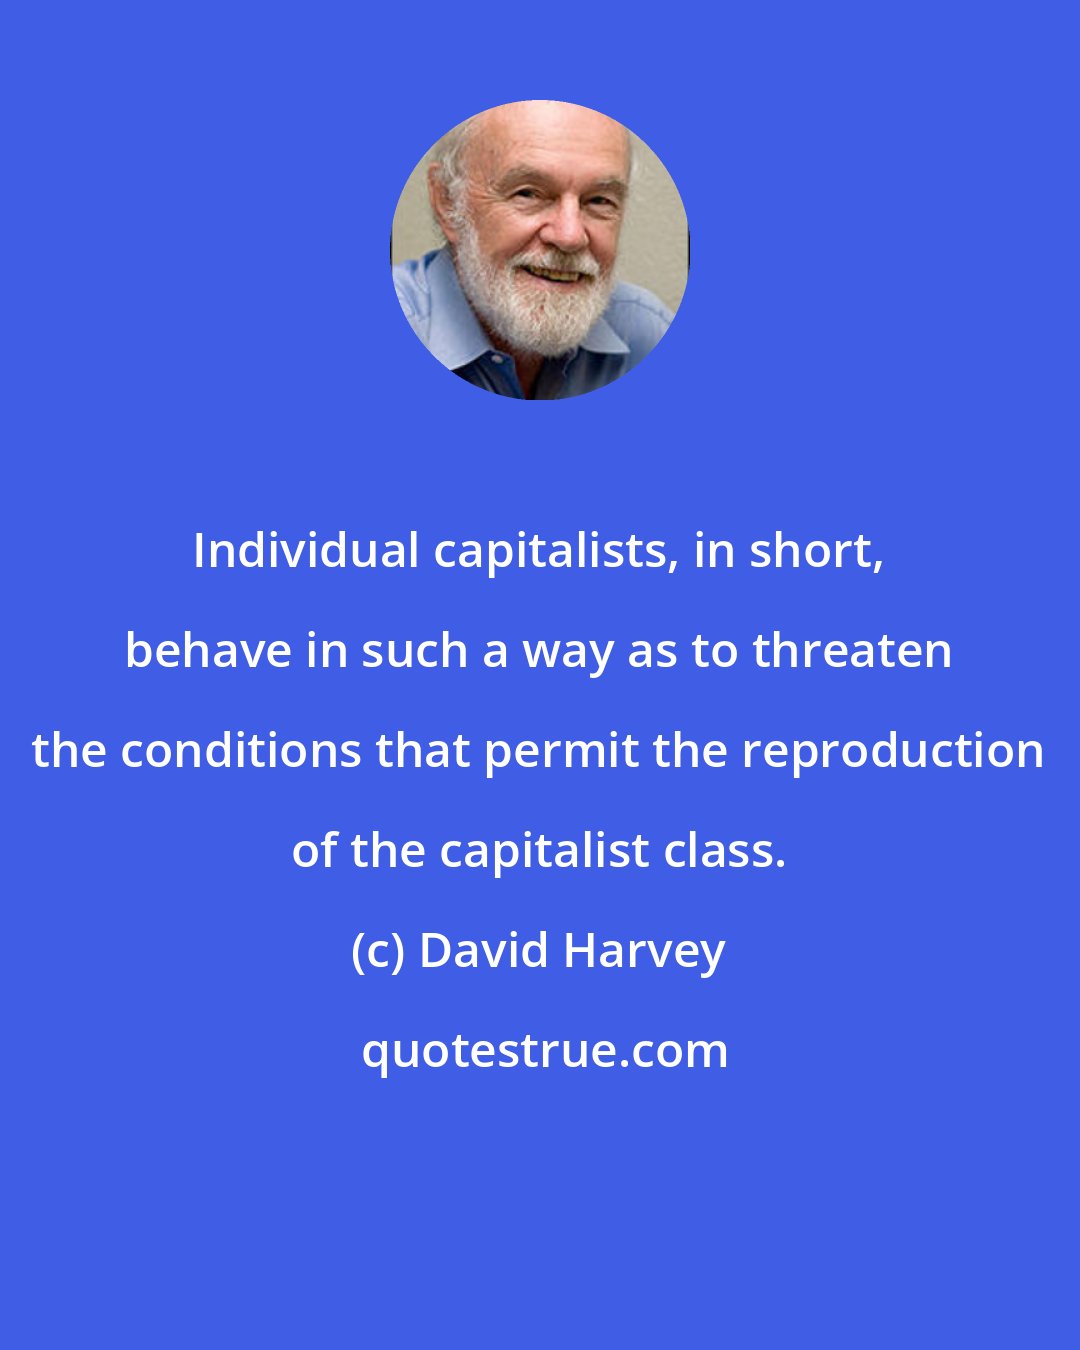 David Harvey: Individual capitalists, in short, behave in such a way as to threaten the conditions that permit the reproduction of the capitalist class.